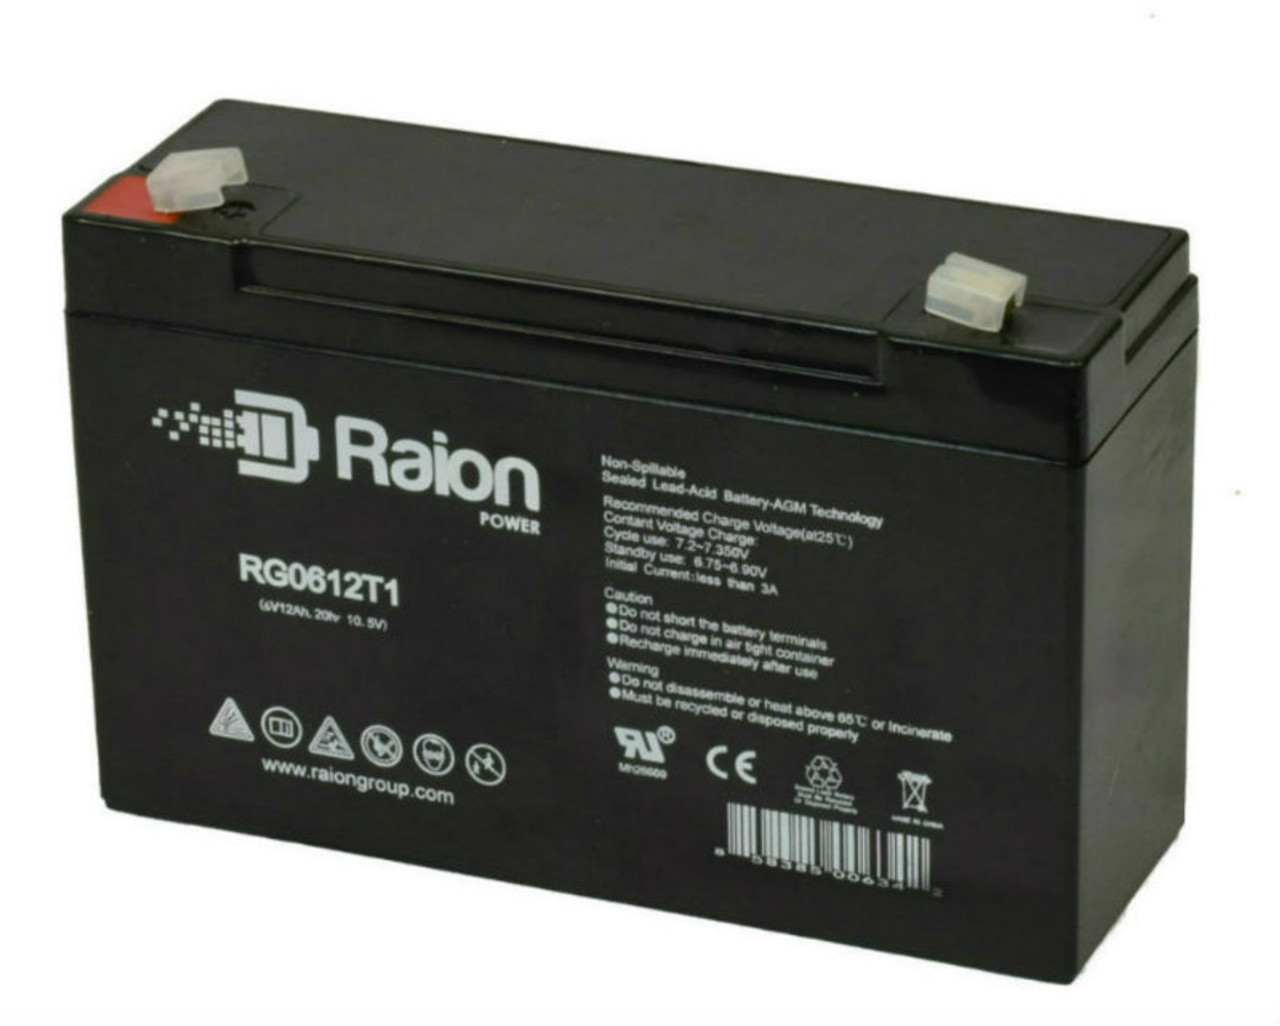 Raion Power RG06120T1 Replacement 6V 12Ah Emergency Light Battery for Holophane M32